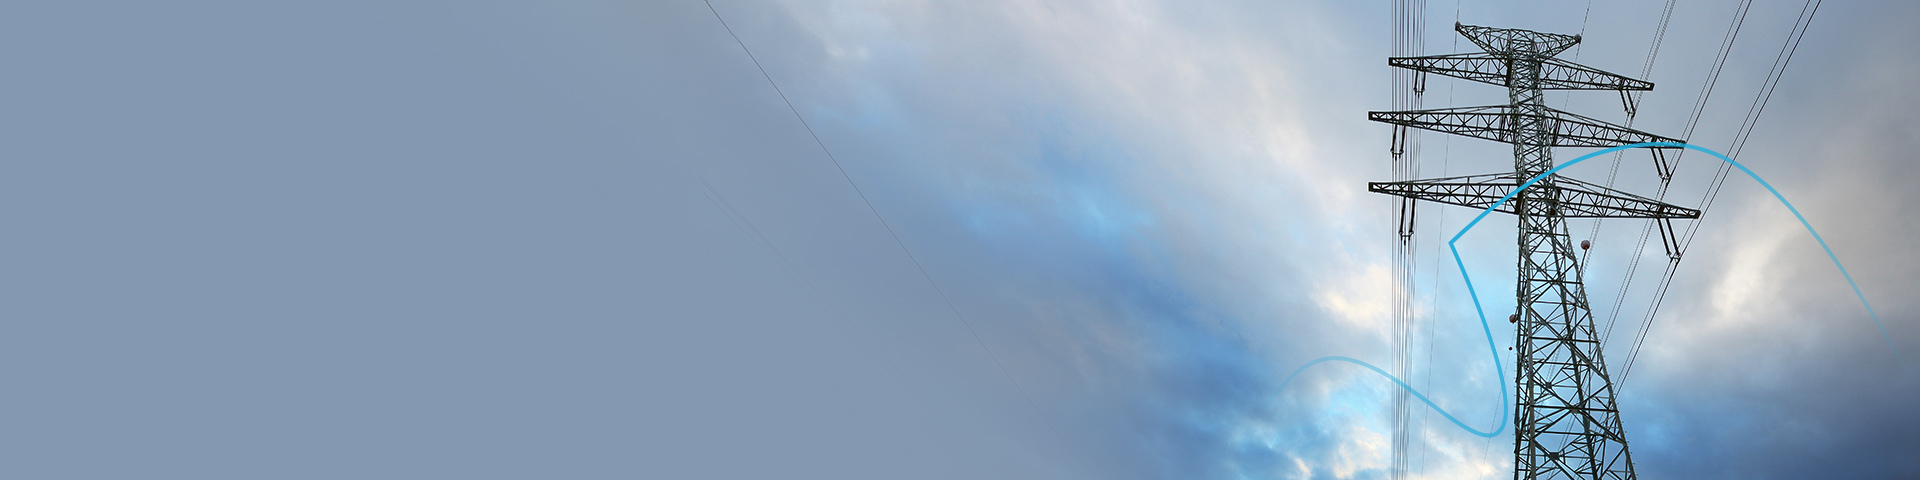 HydroOne-Web-Banner